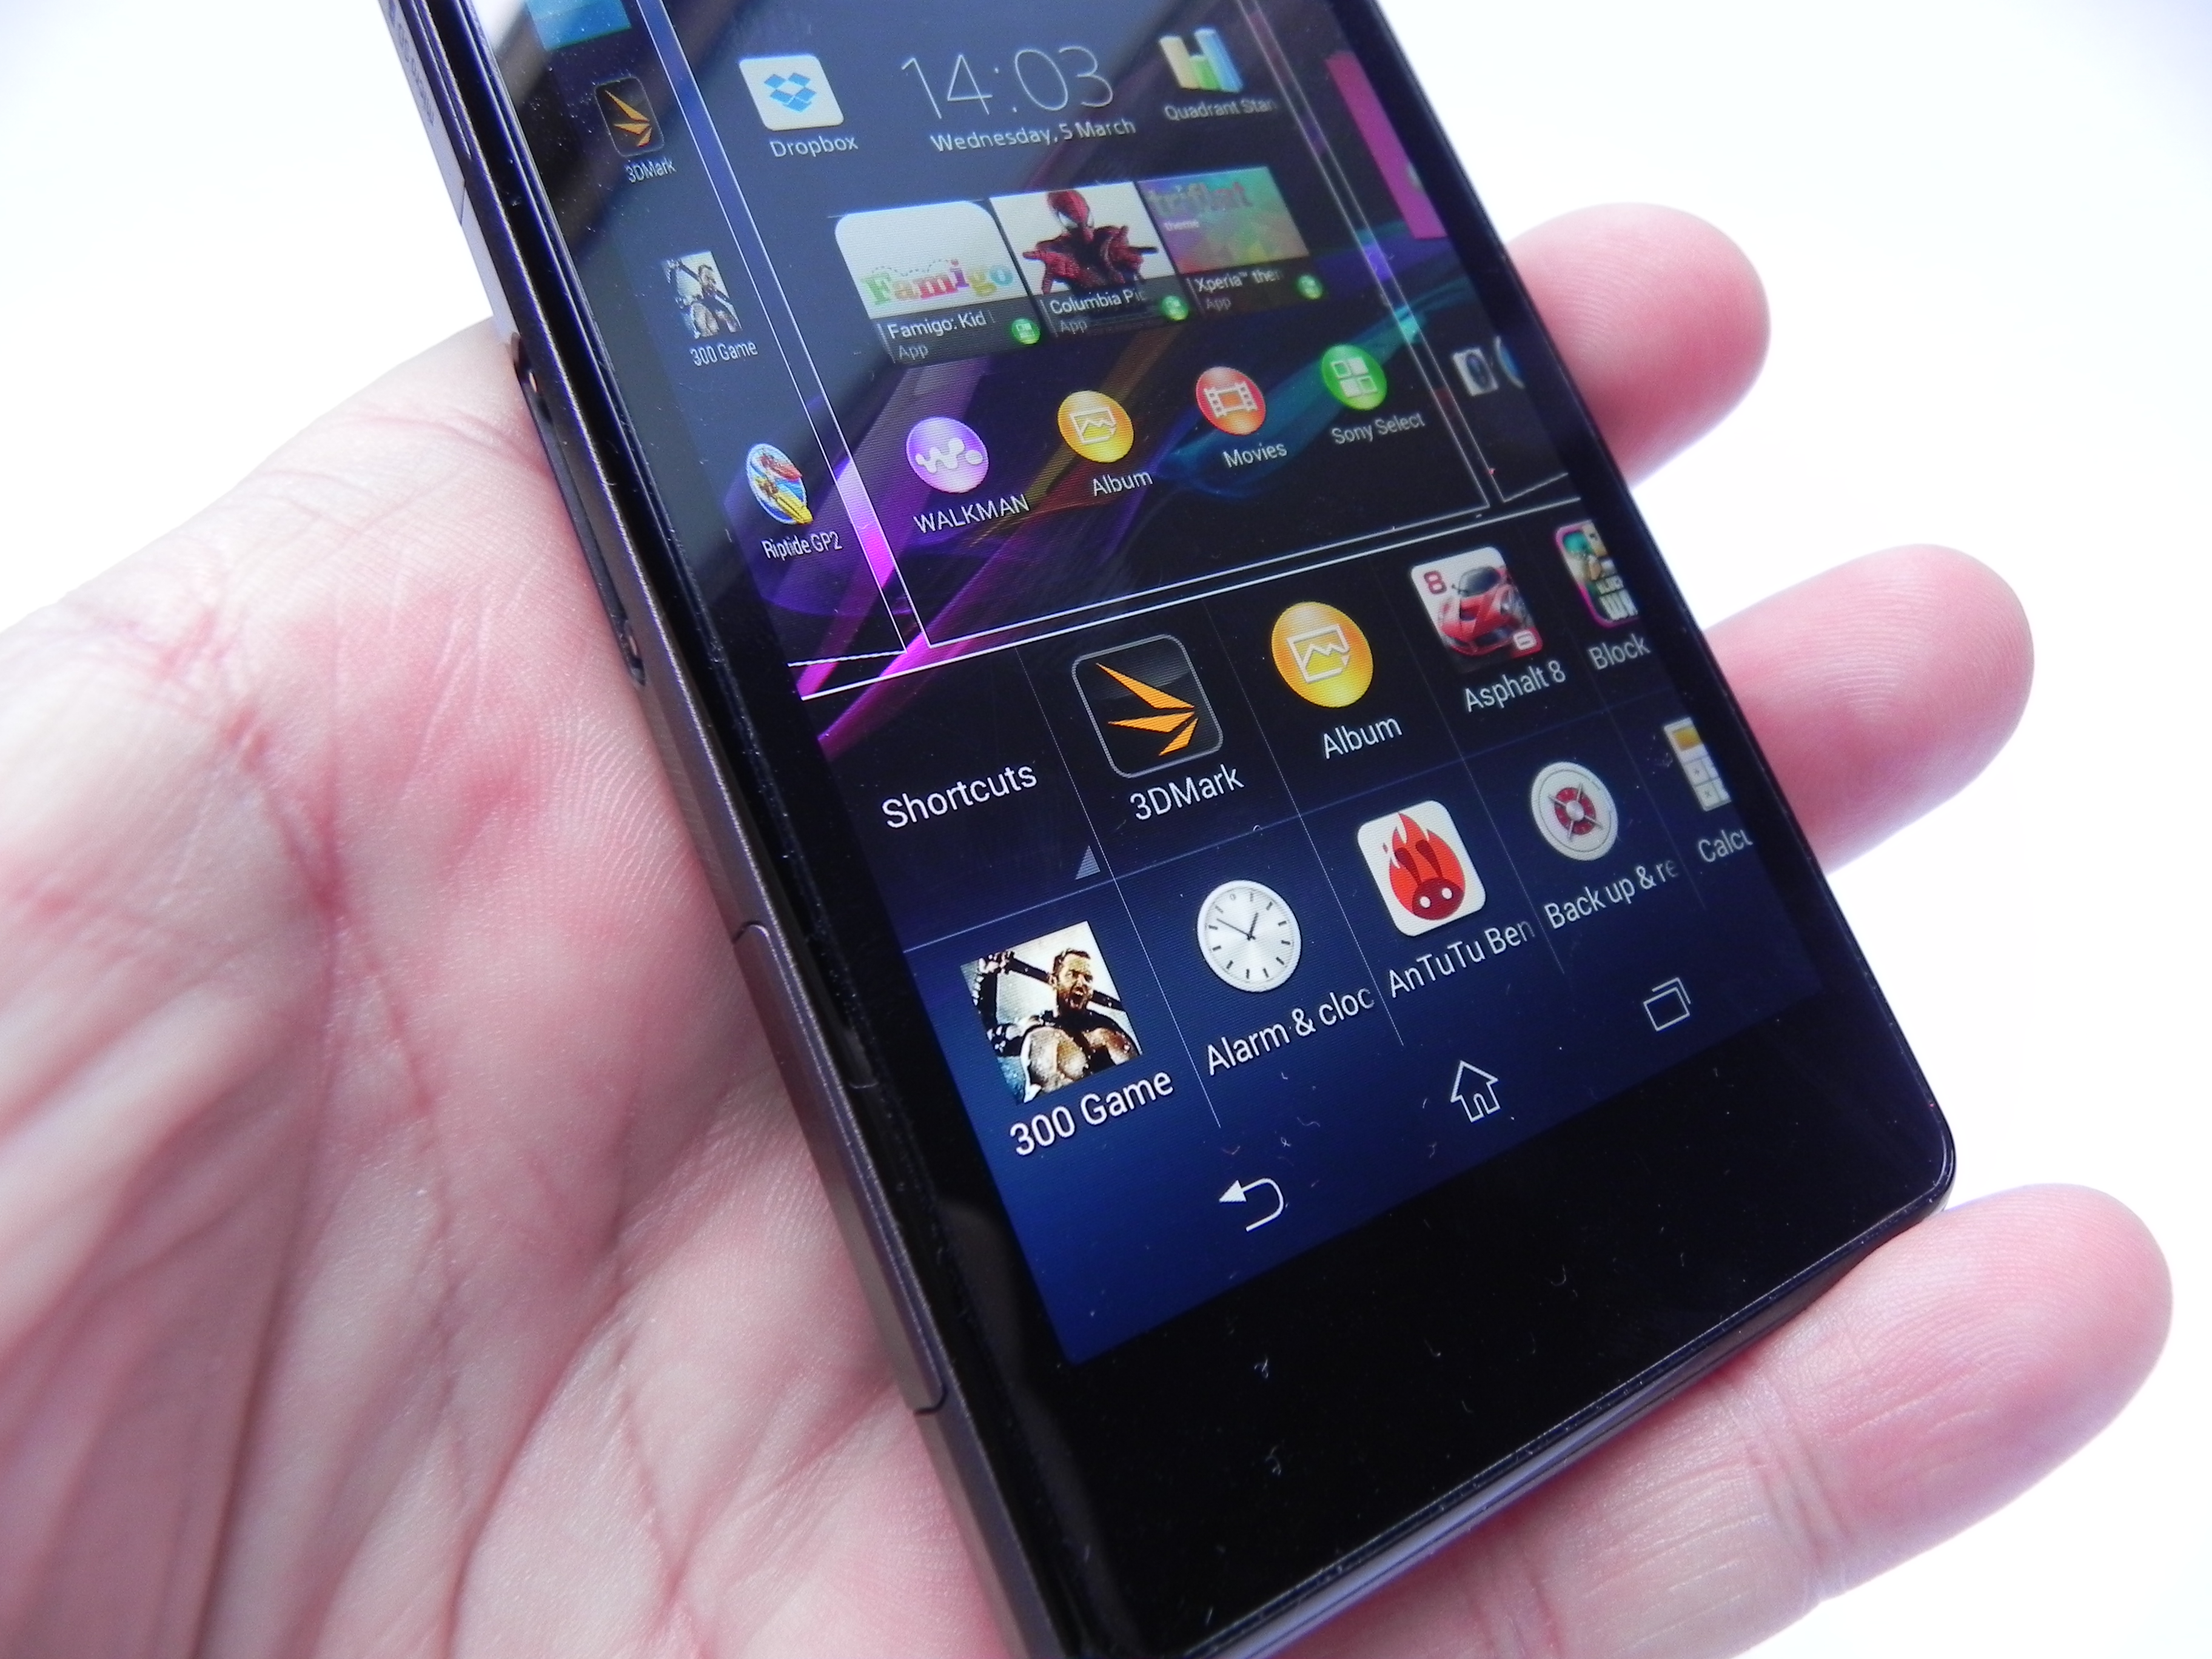 oosters Aanvankelijk elektrode Sony Xperia Z1 Compact Review: Smaller Xperia Z1 is Better Than the Big  Brother in a Few Regards (Video) | GSMDome.com